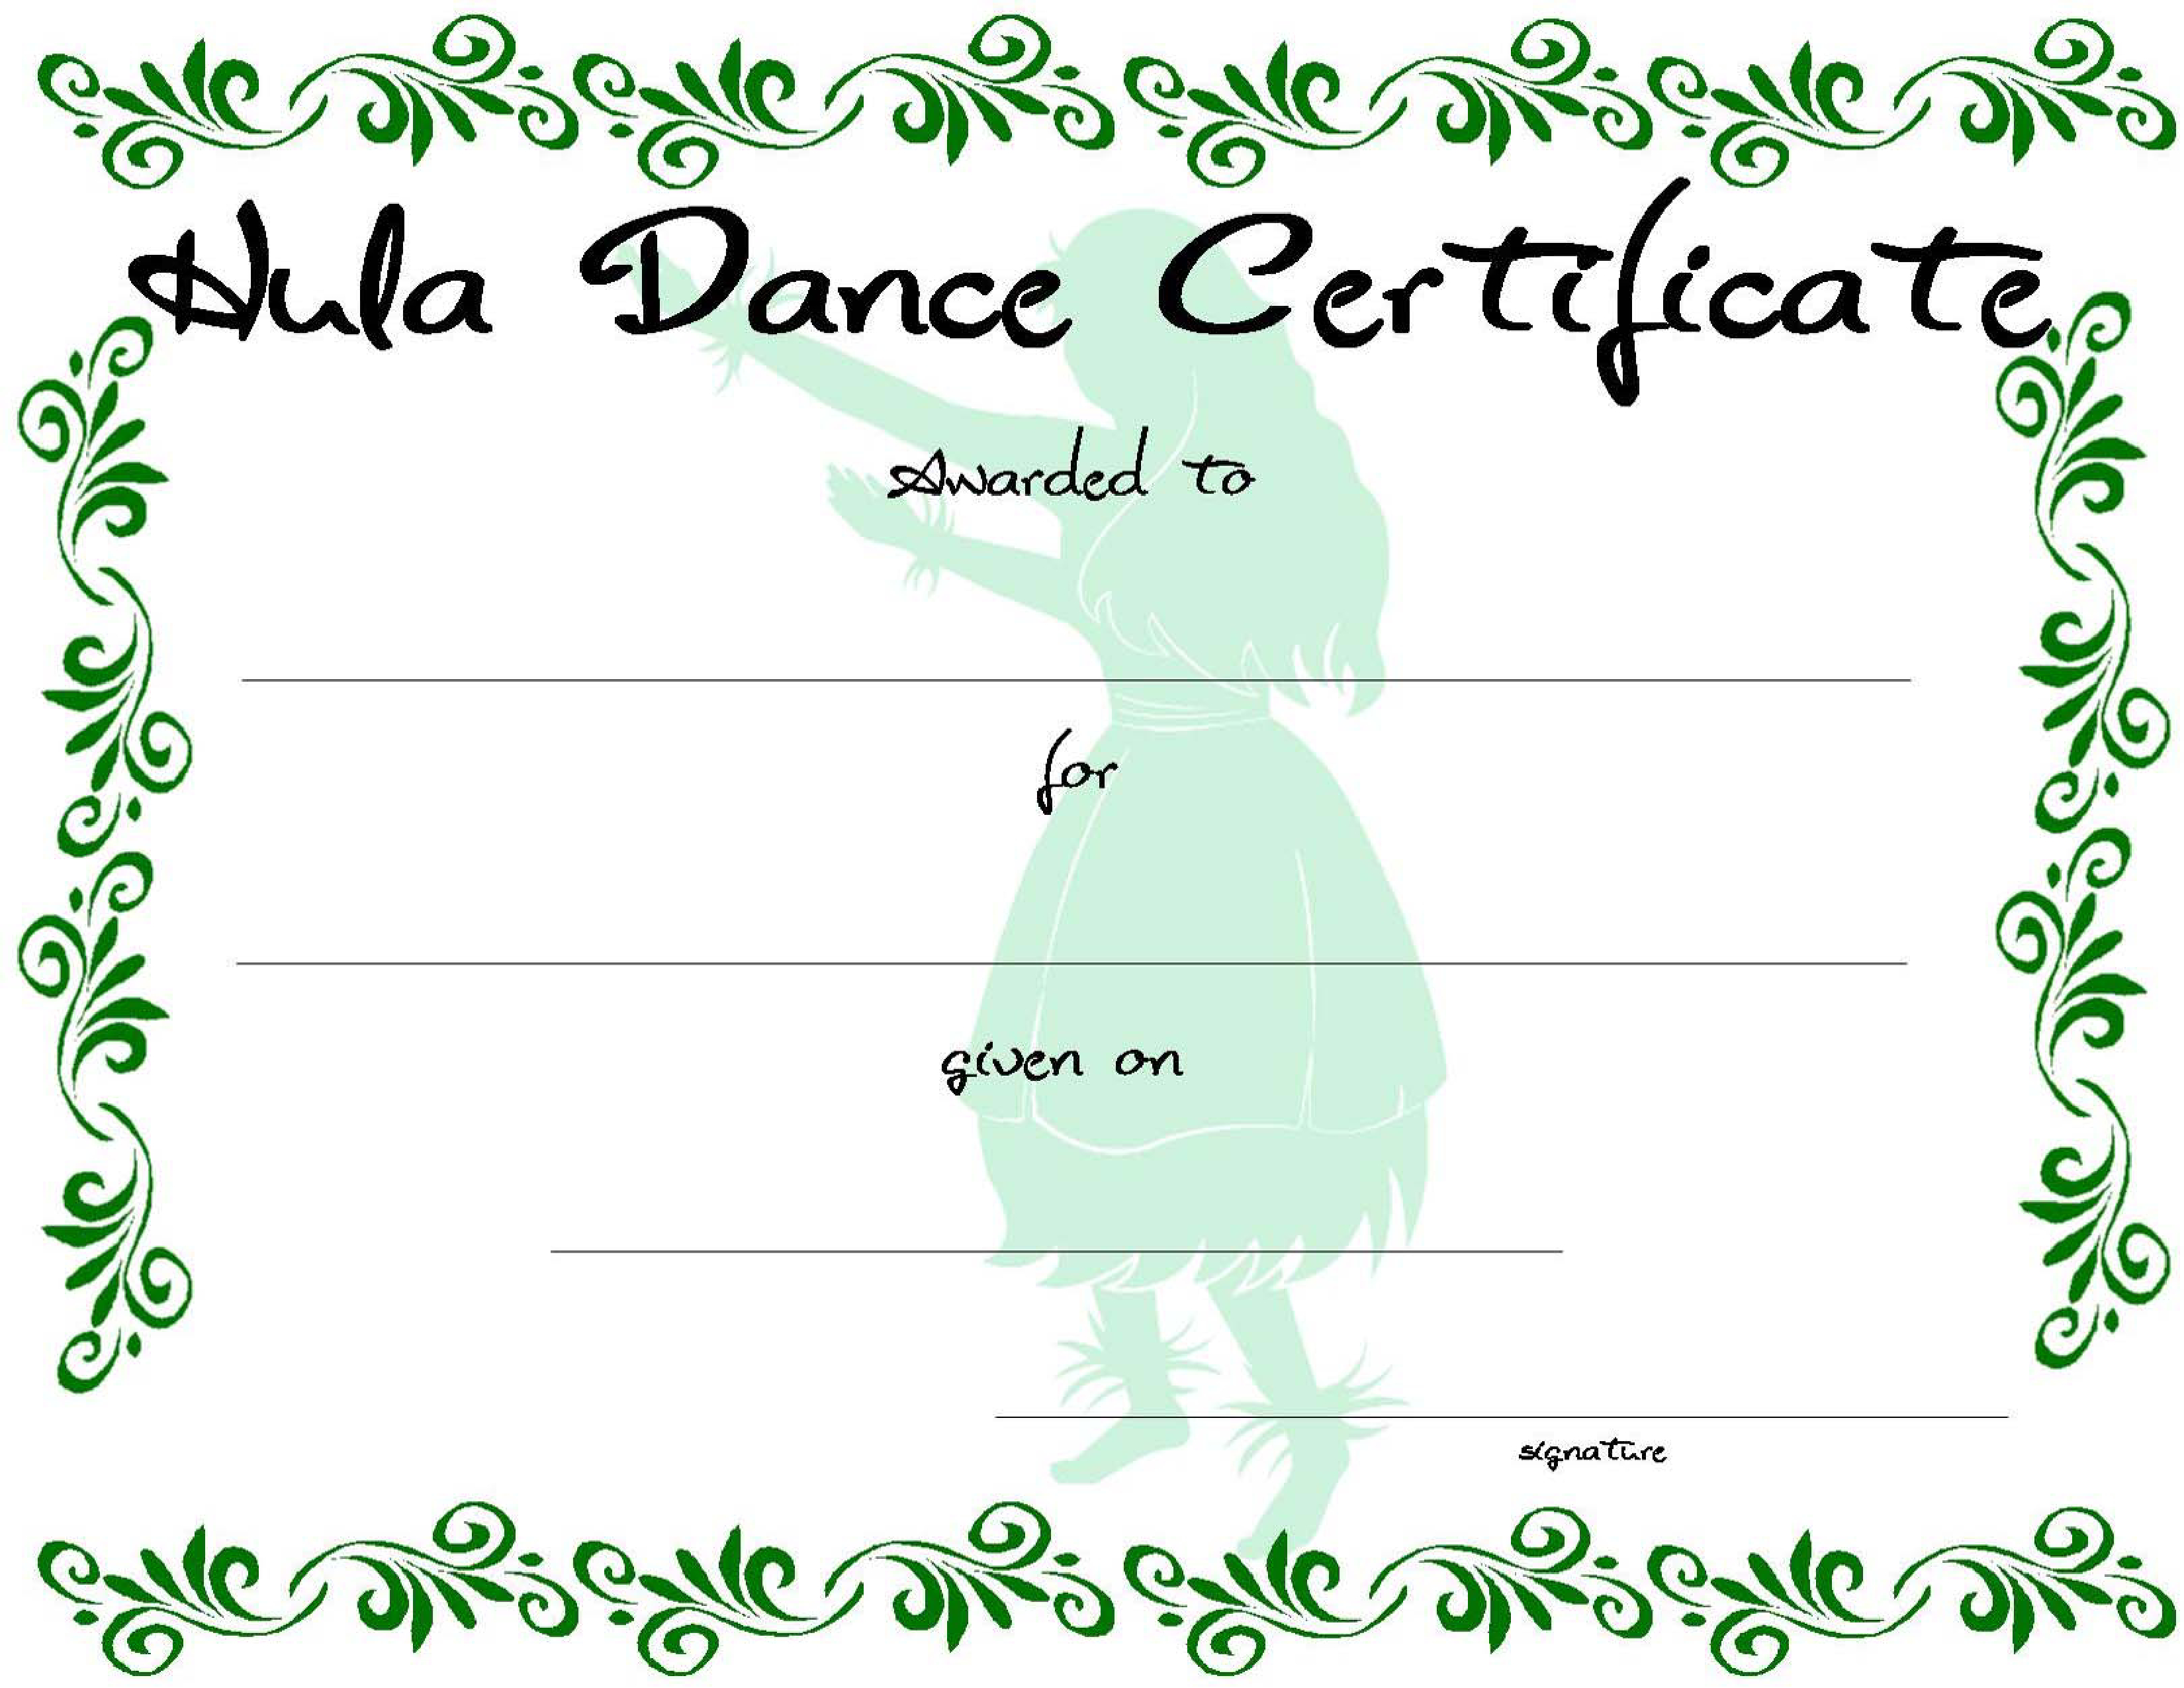 Dance Certificate | Templates At Allbusinesstemplates Inside Dance Certificate Template